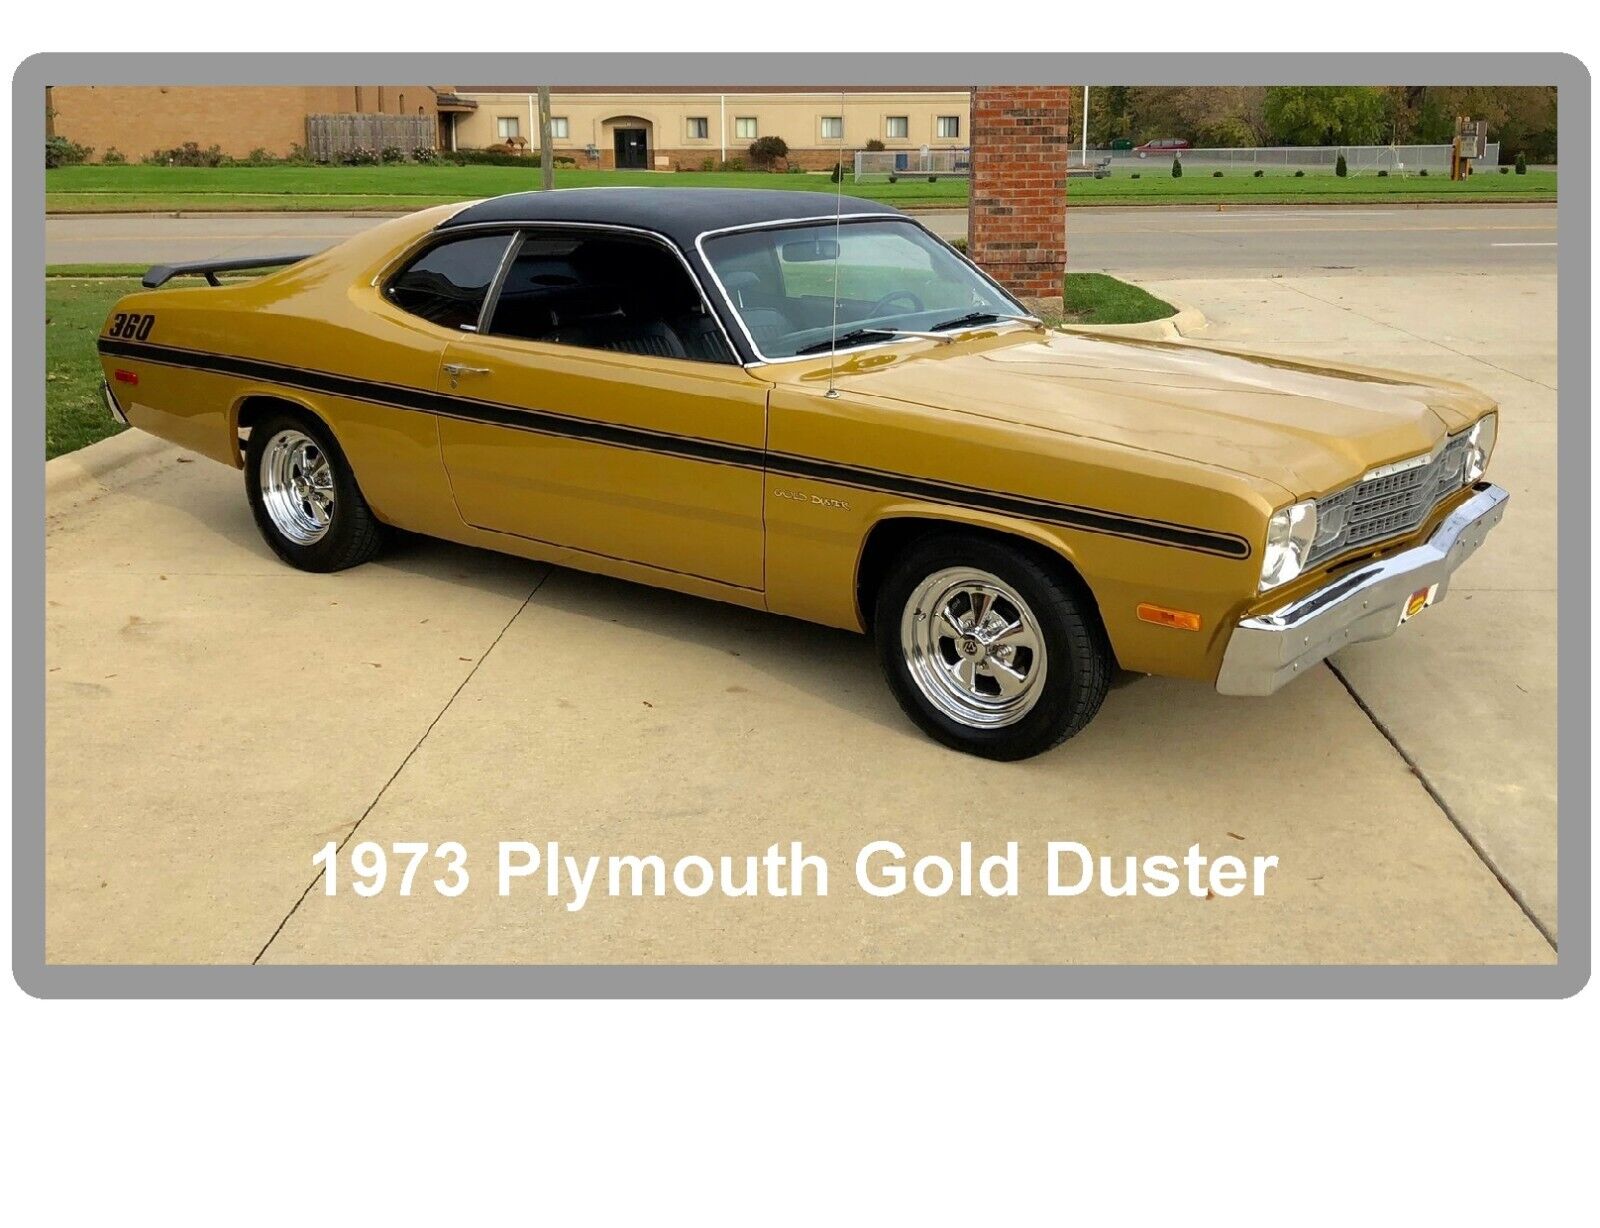 1973 Plymouth Gold Duster Black Top Refrigerator / Tool Box  Magnet